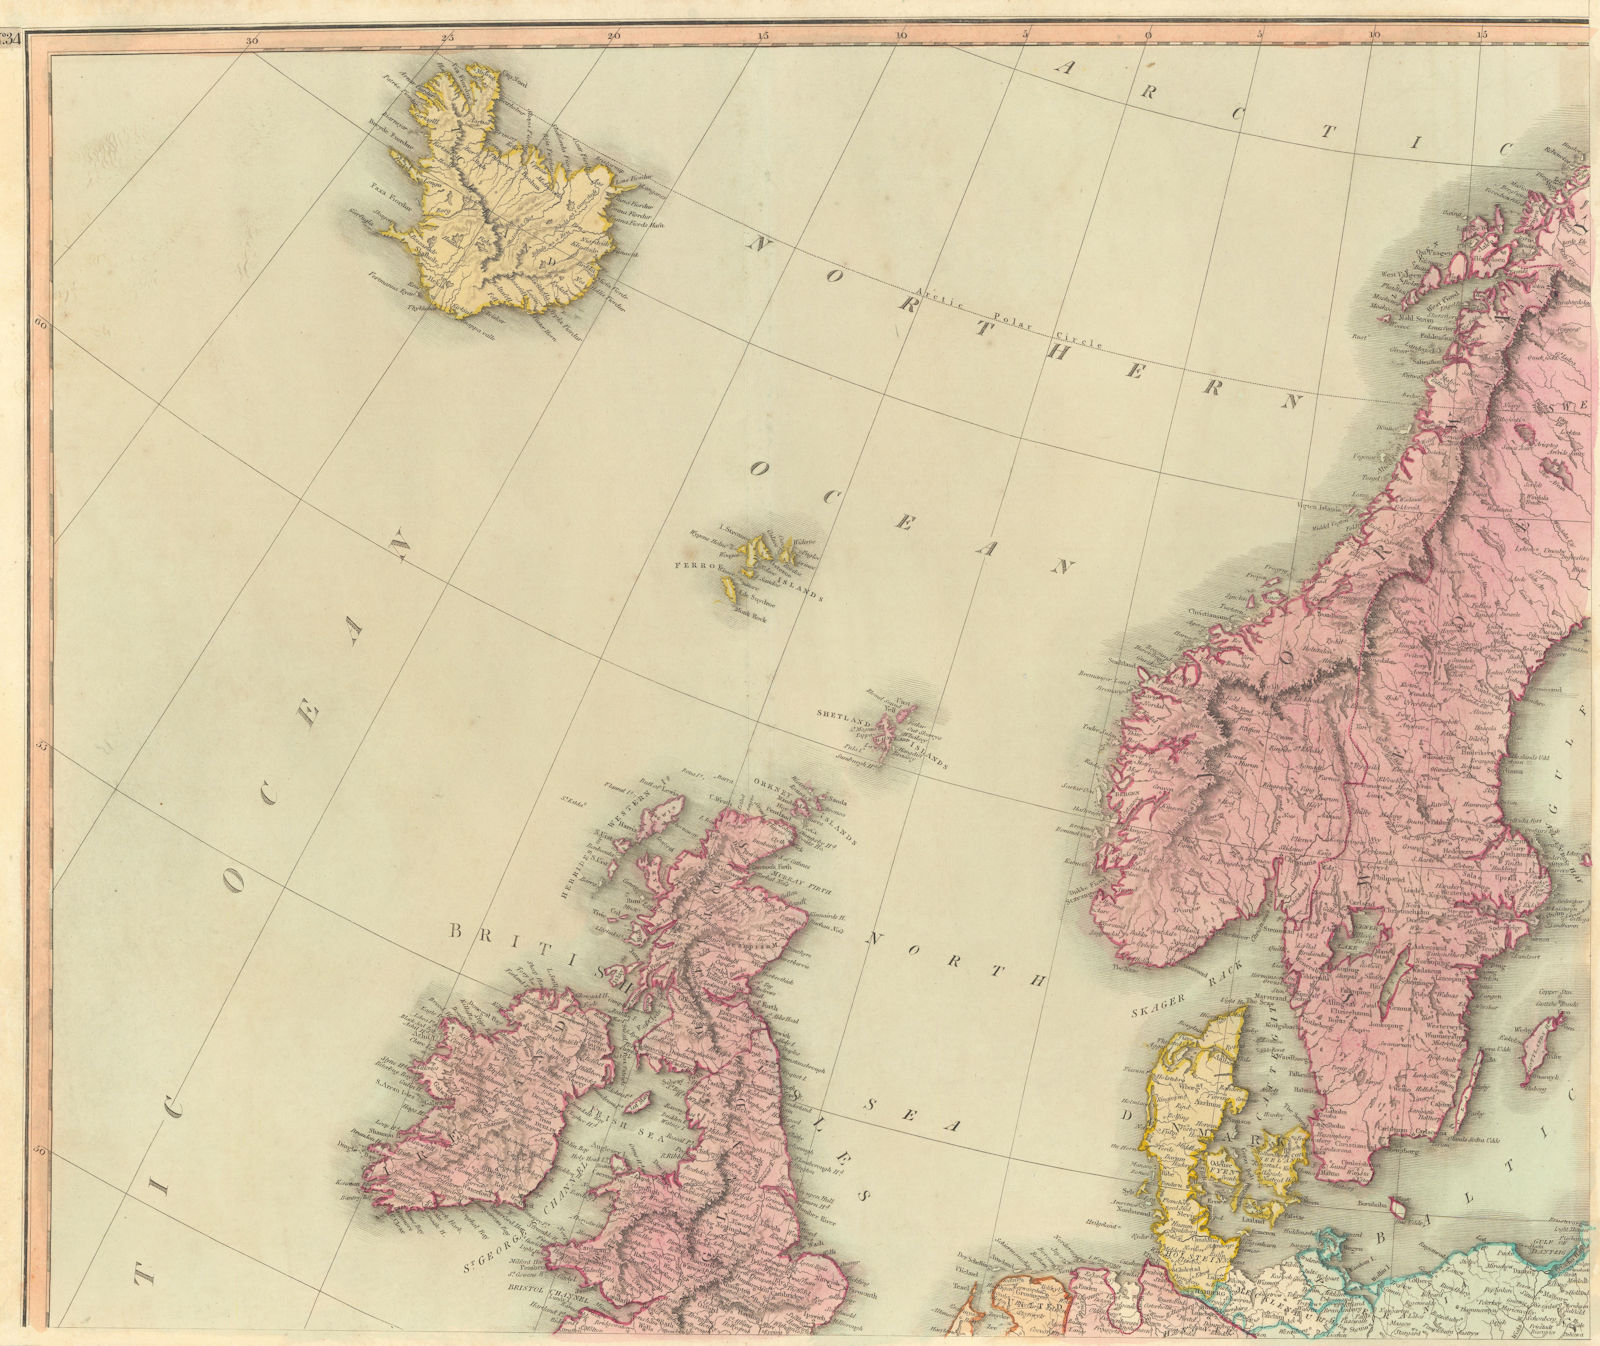 Associate Product North-west Europe. Nordic Countries. British Isles Scandinavia. THOMSON 1817 map